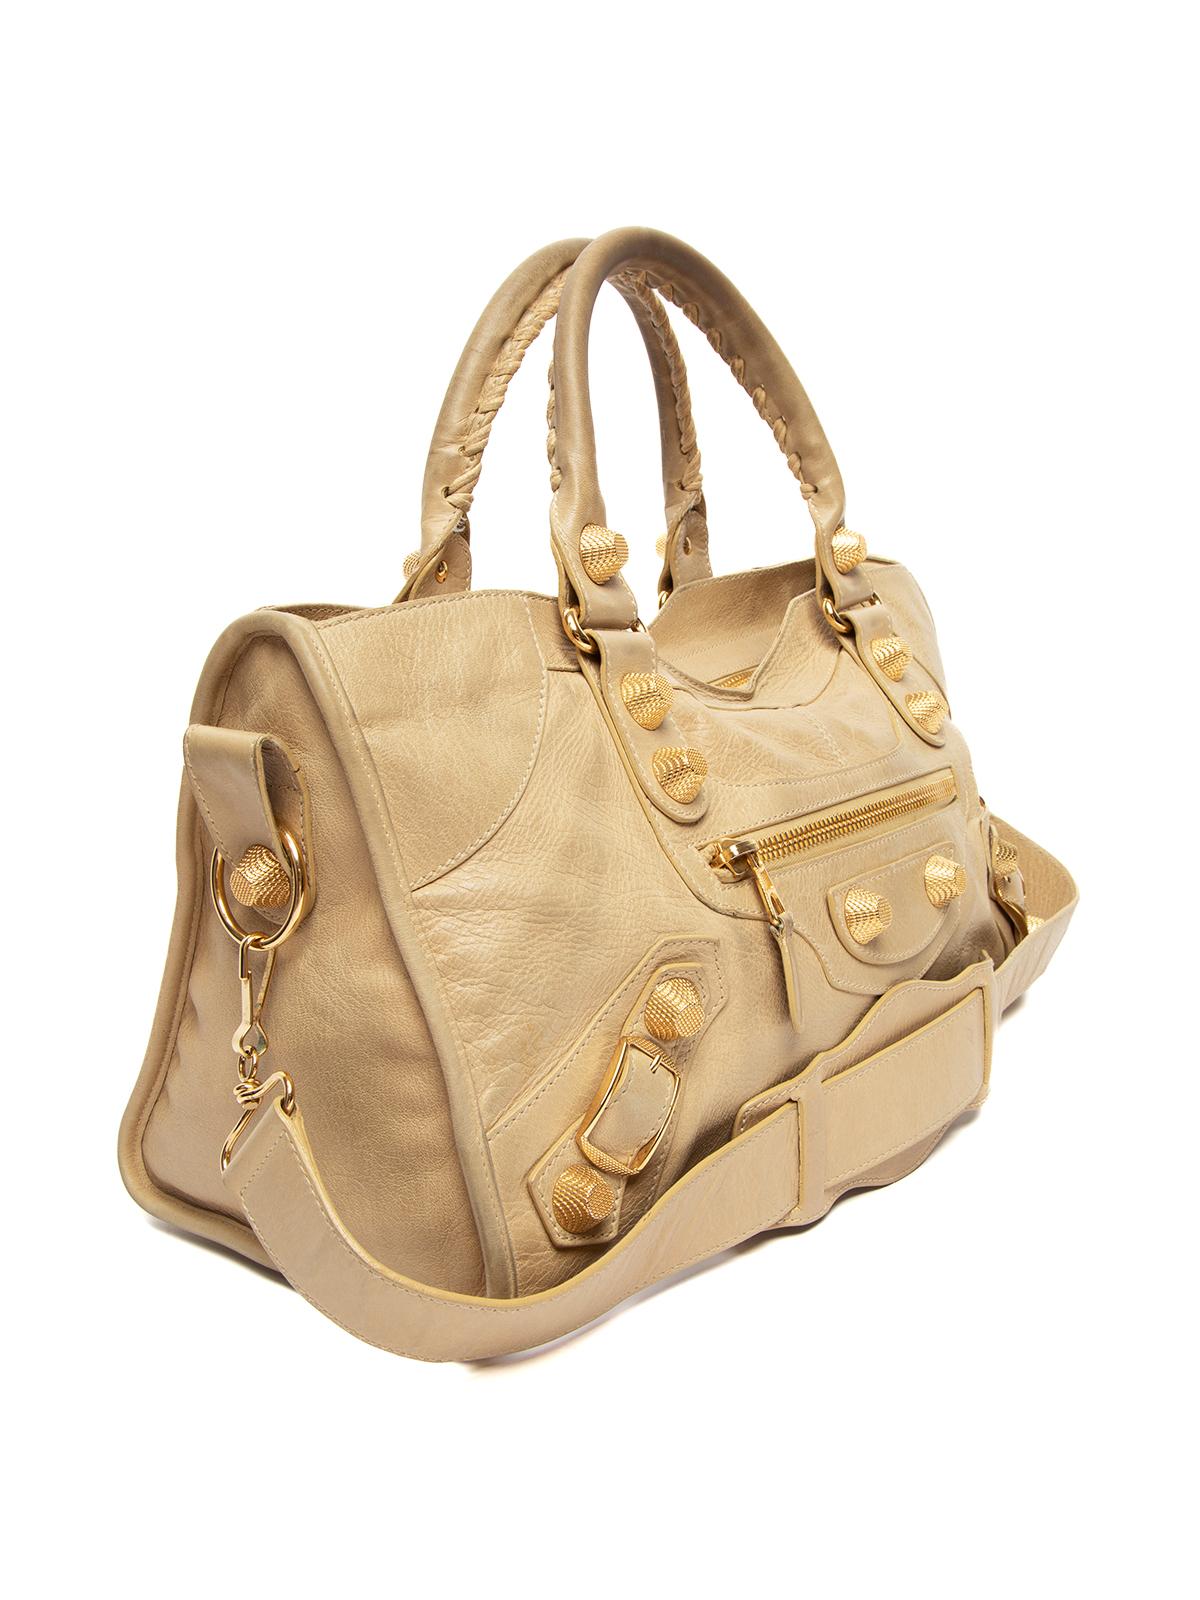 CONDITION is Good. Minor wear to city bag is evident. General signs of creasing to leather, moderate discolouration to leather handles and metal hardware on this used Balenciaga designer resale item. Details Beige Leather City Bag Zip fastening Two